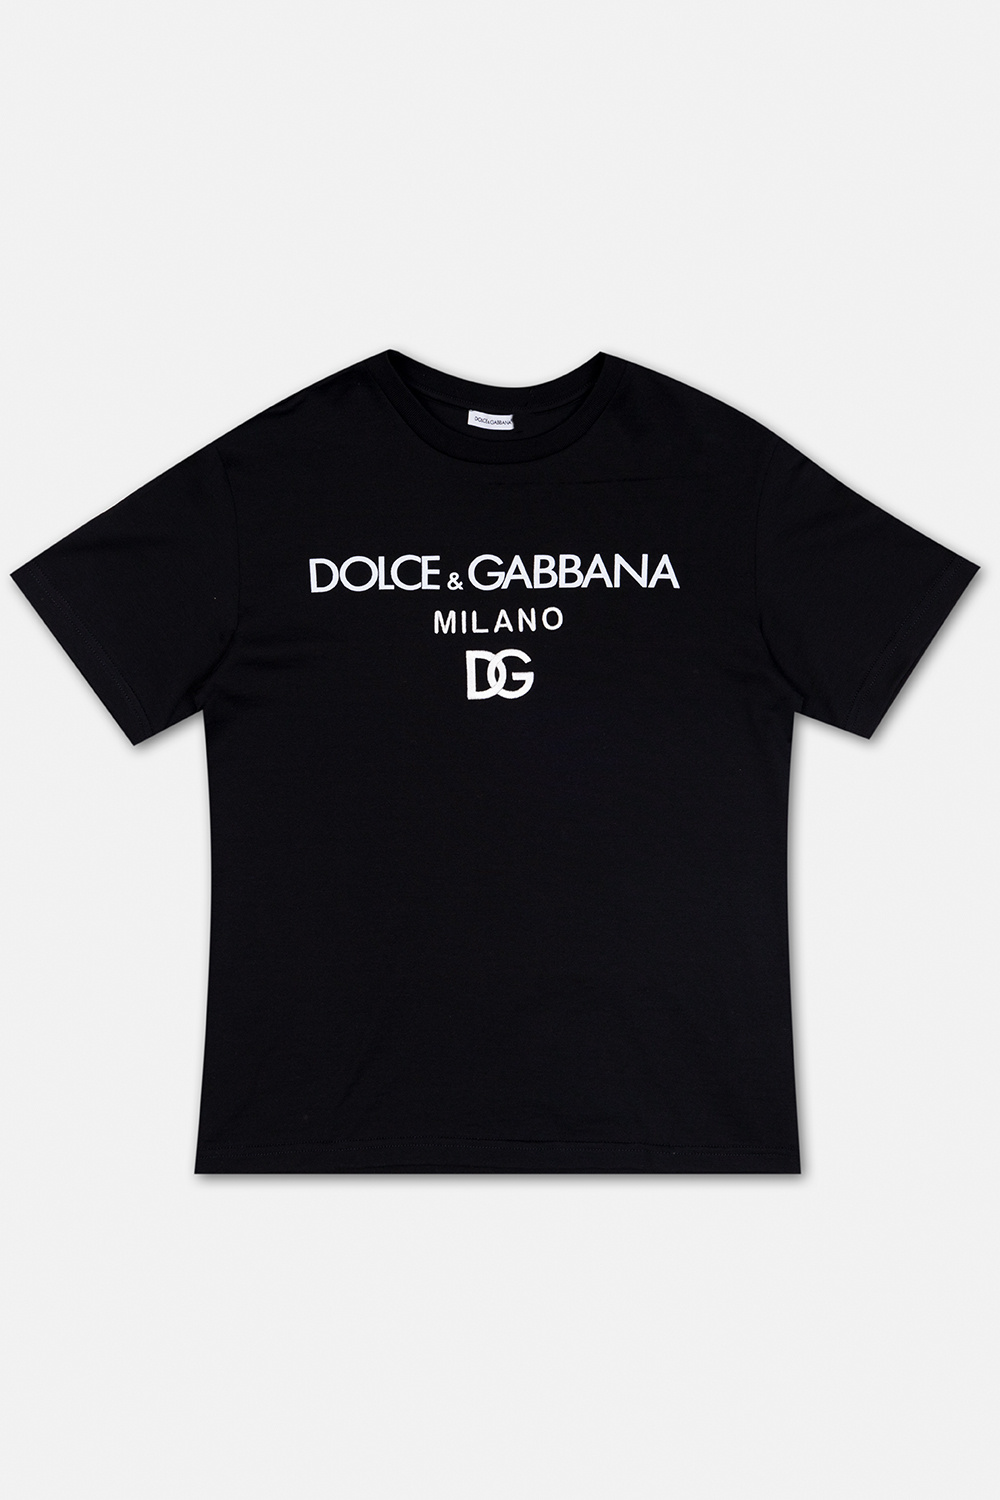 Dolce & Gabbana panelled fitted corset T-shirt with logo